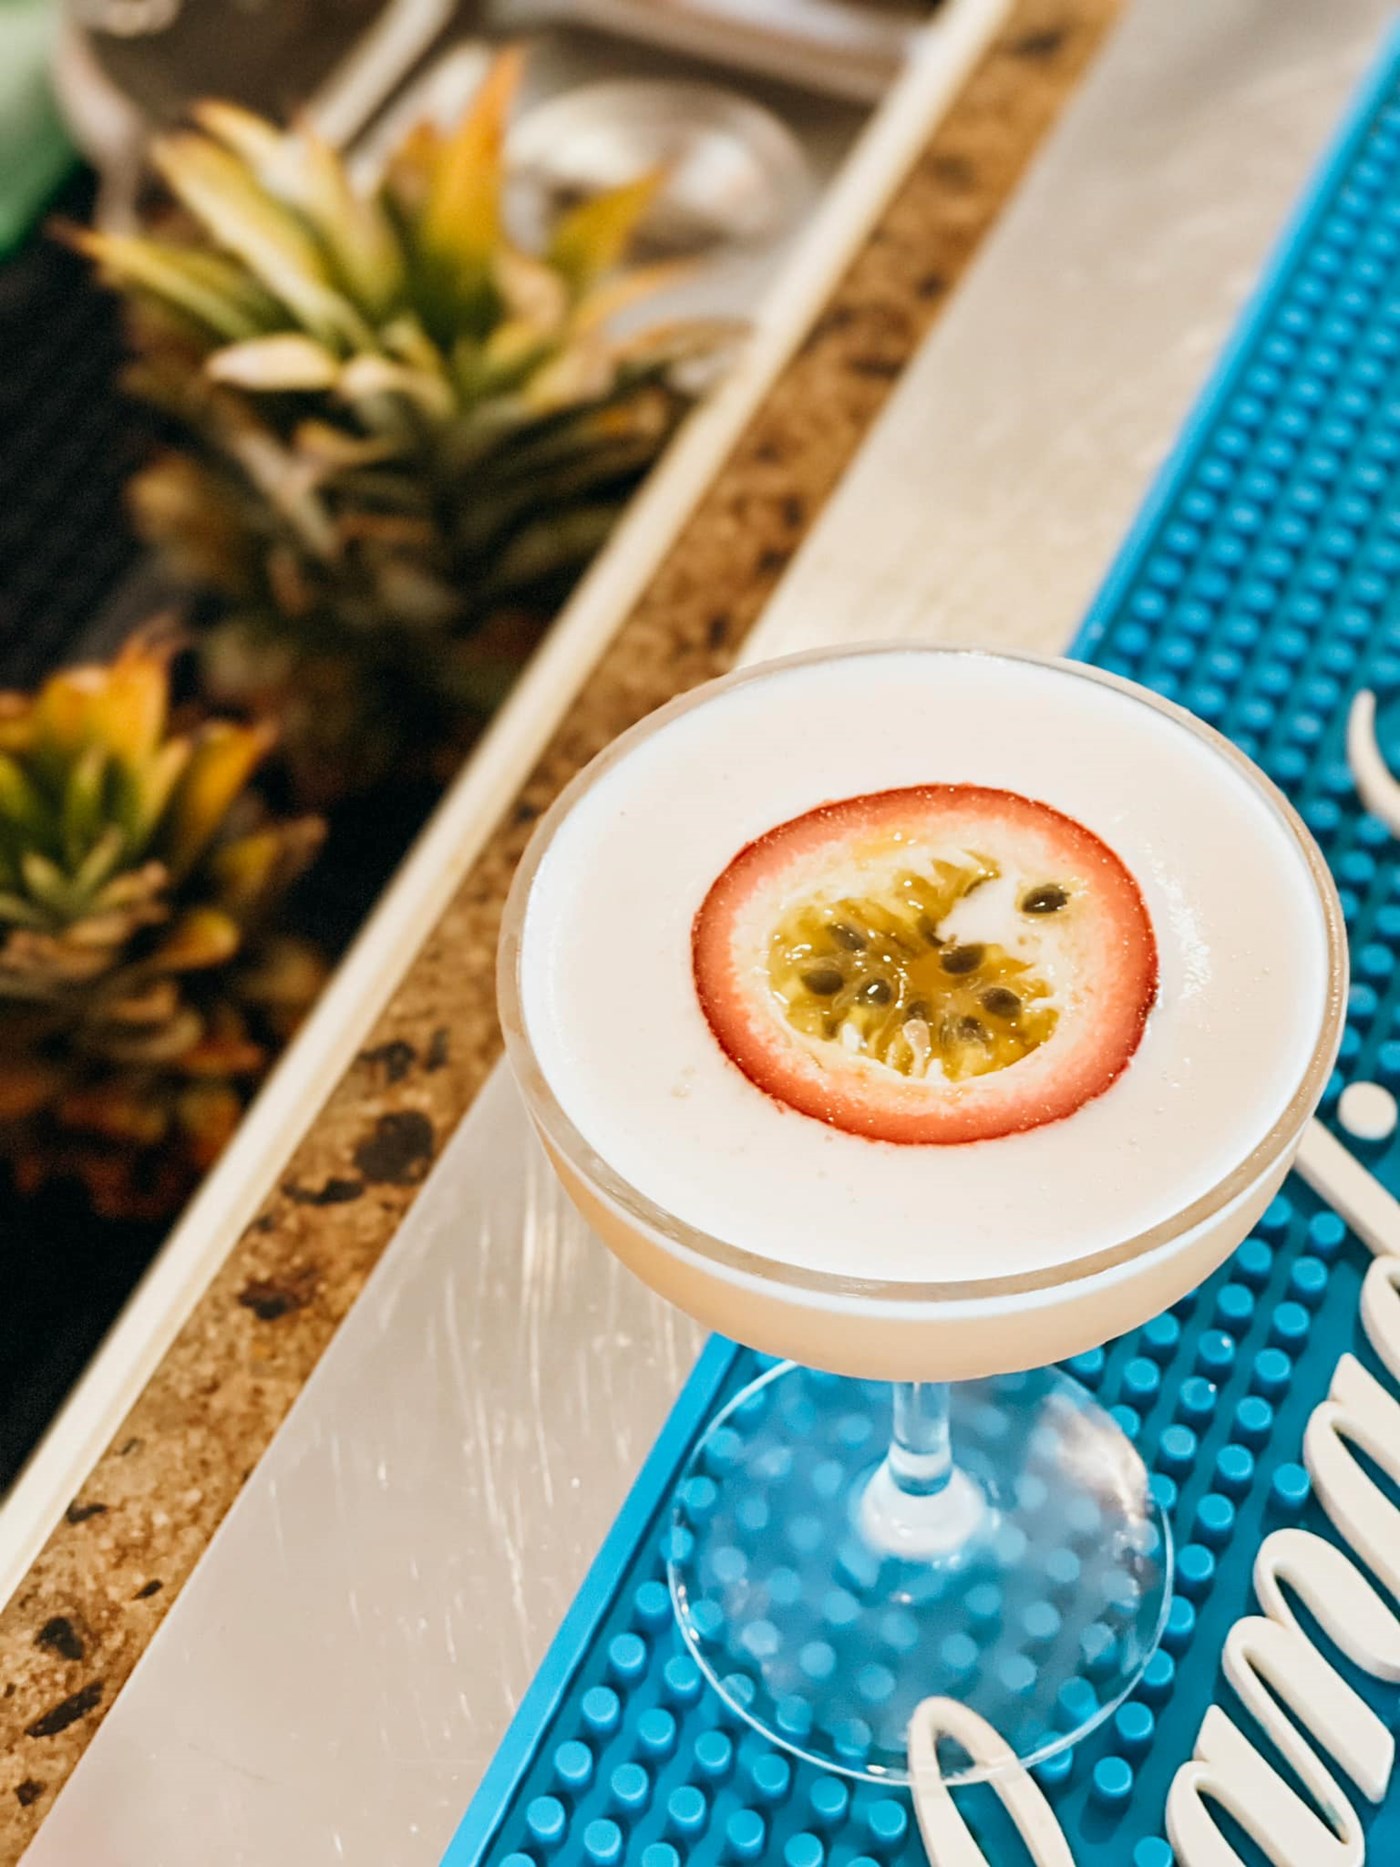 Passionfruit martini on a blue bar mat